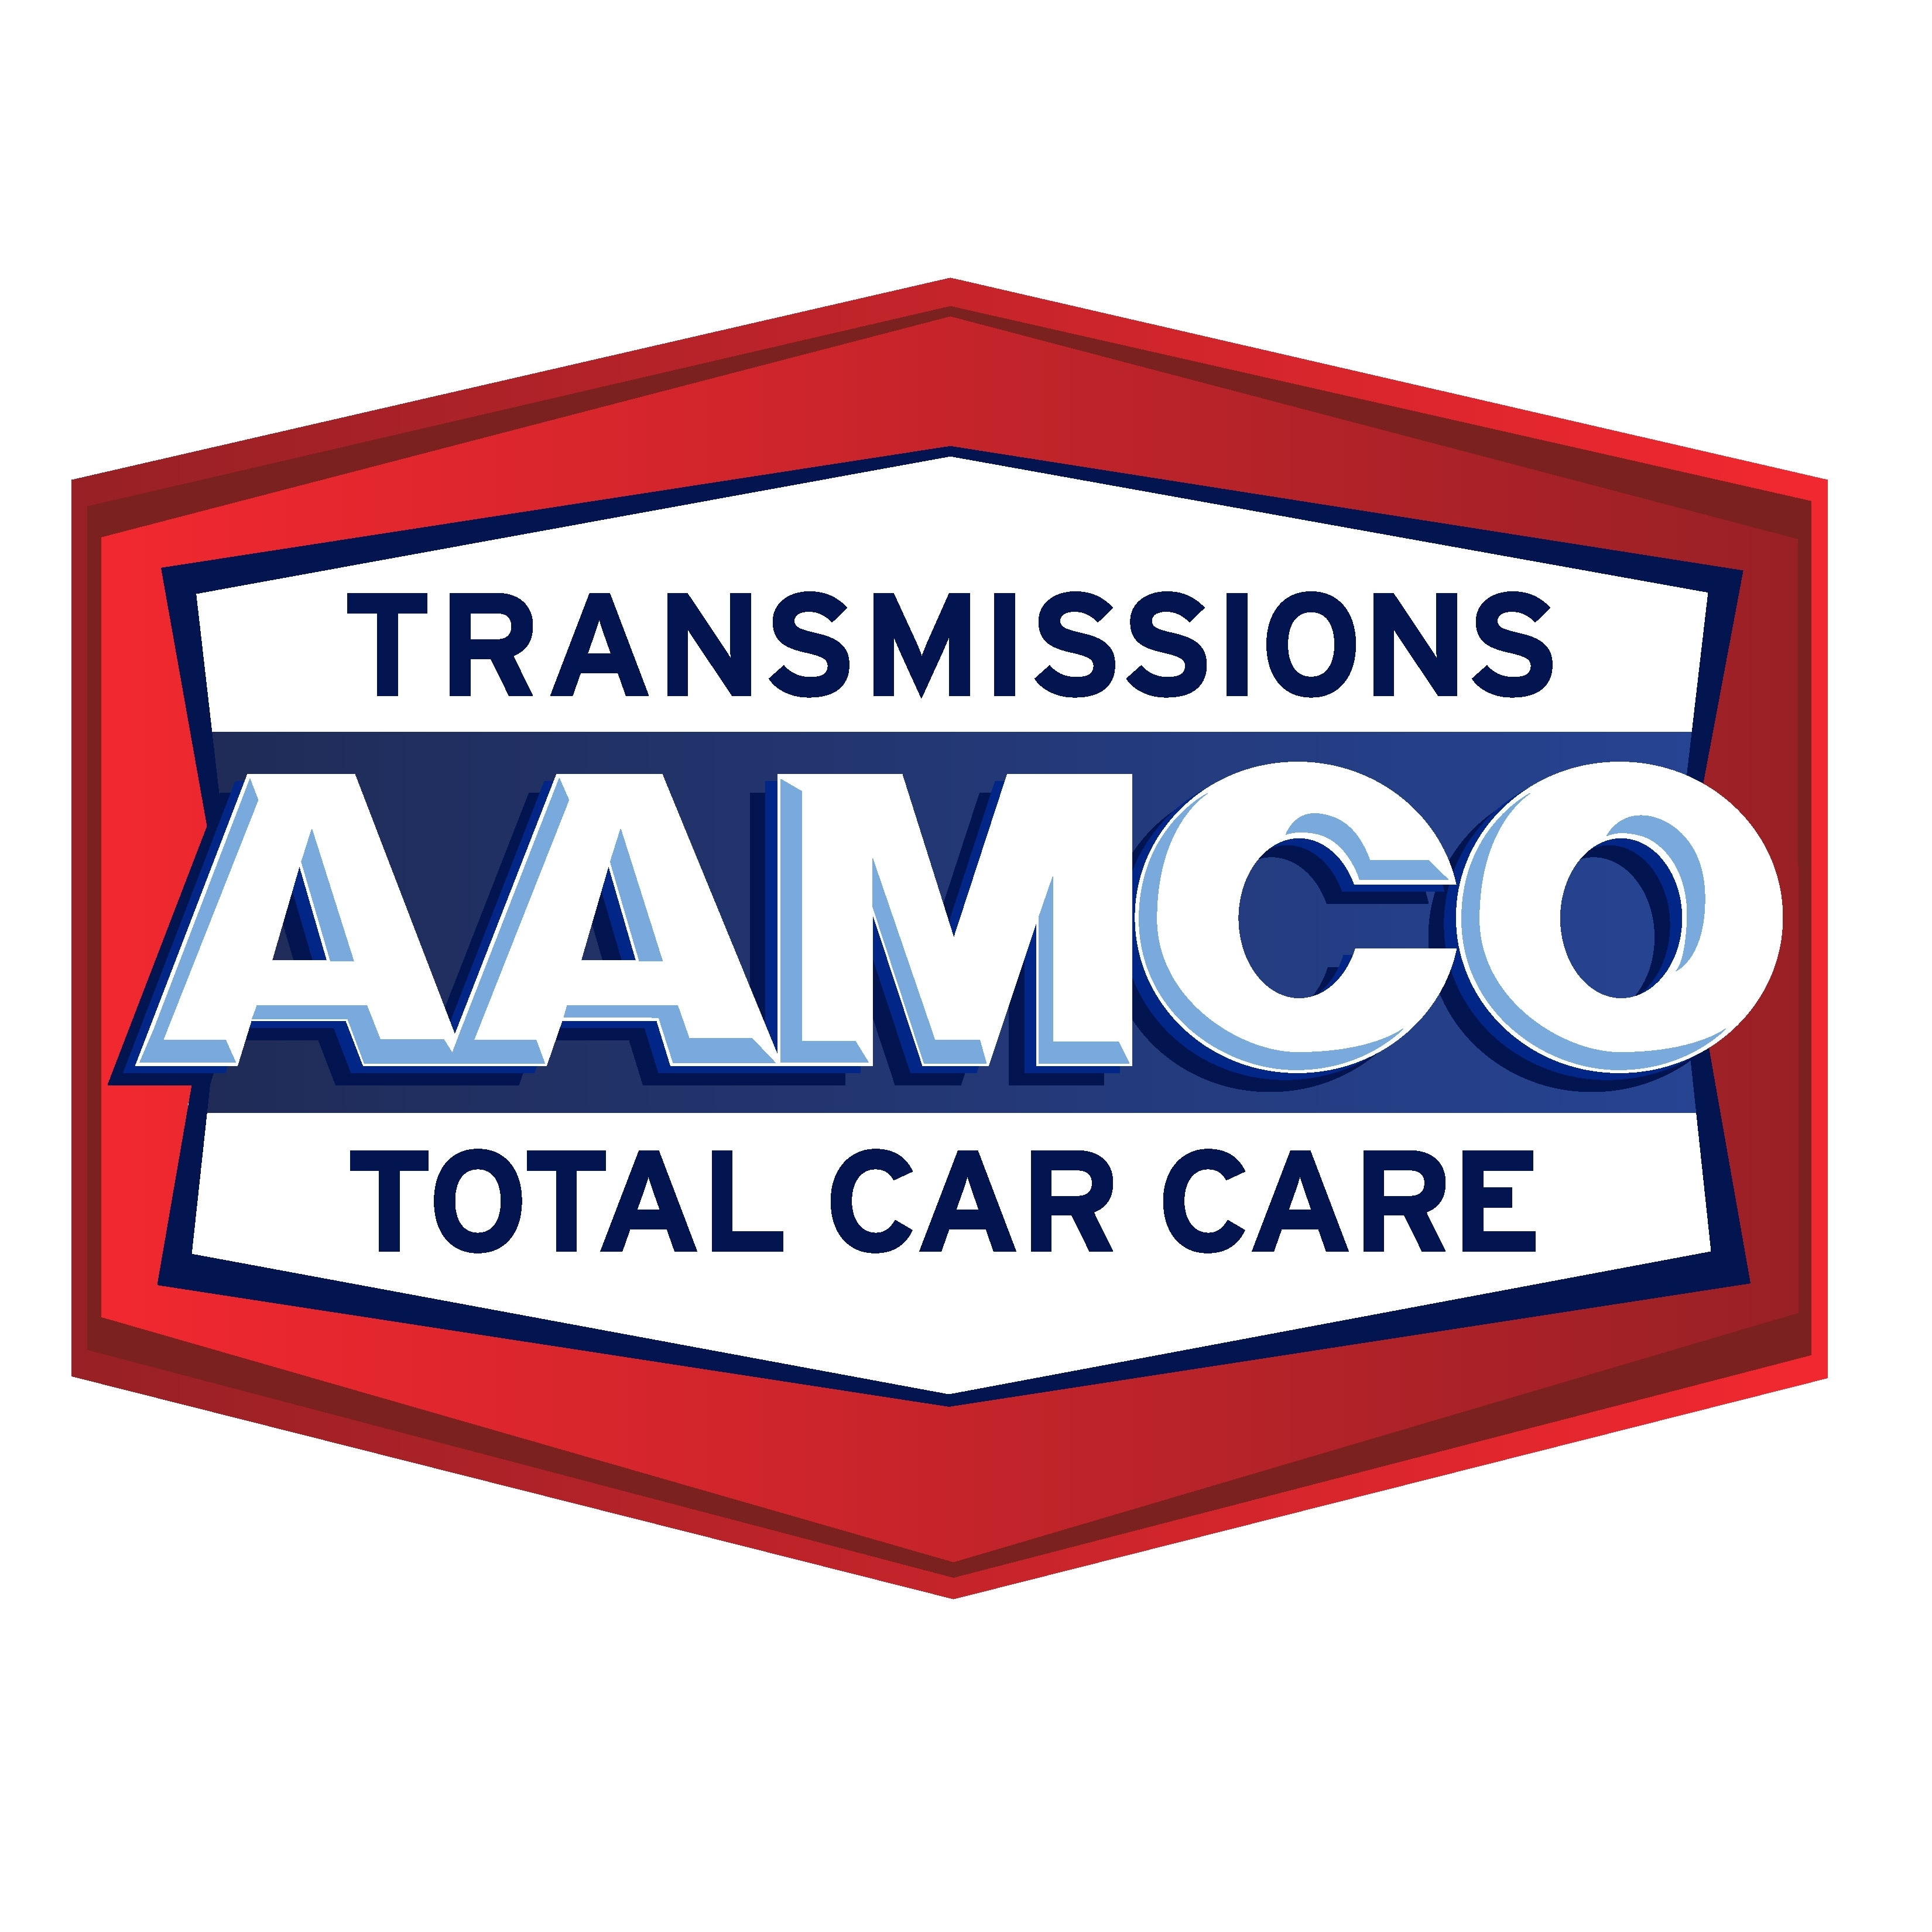 AAMCO Transmissions and Total Car Care Photo